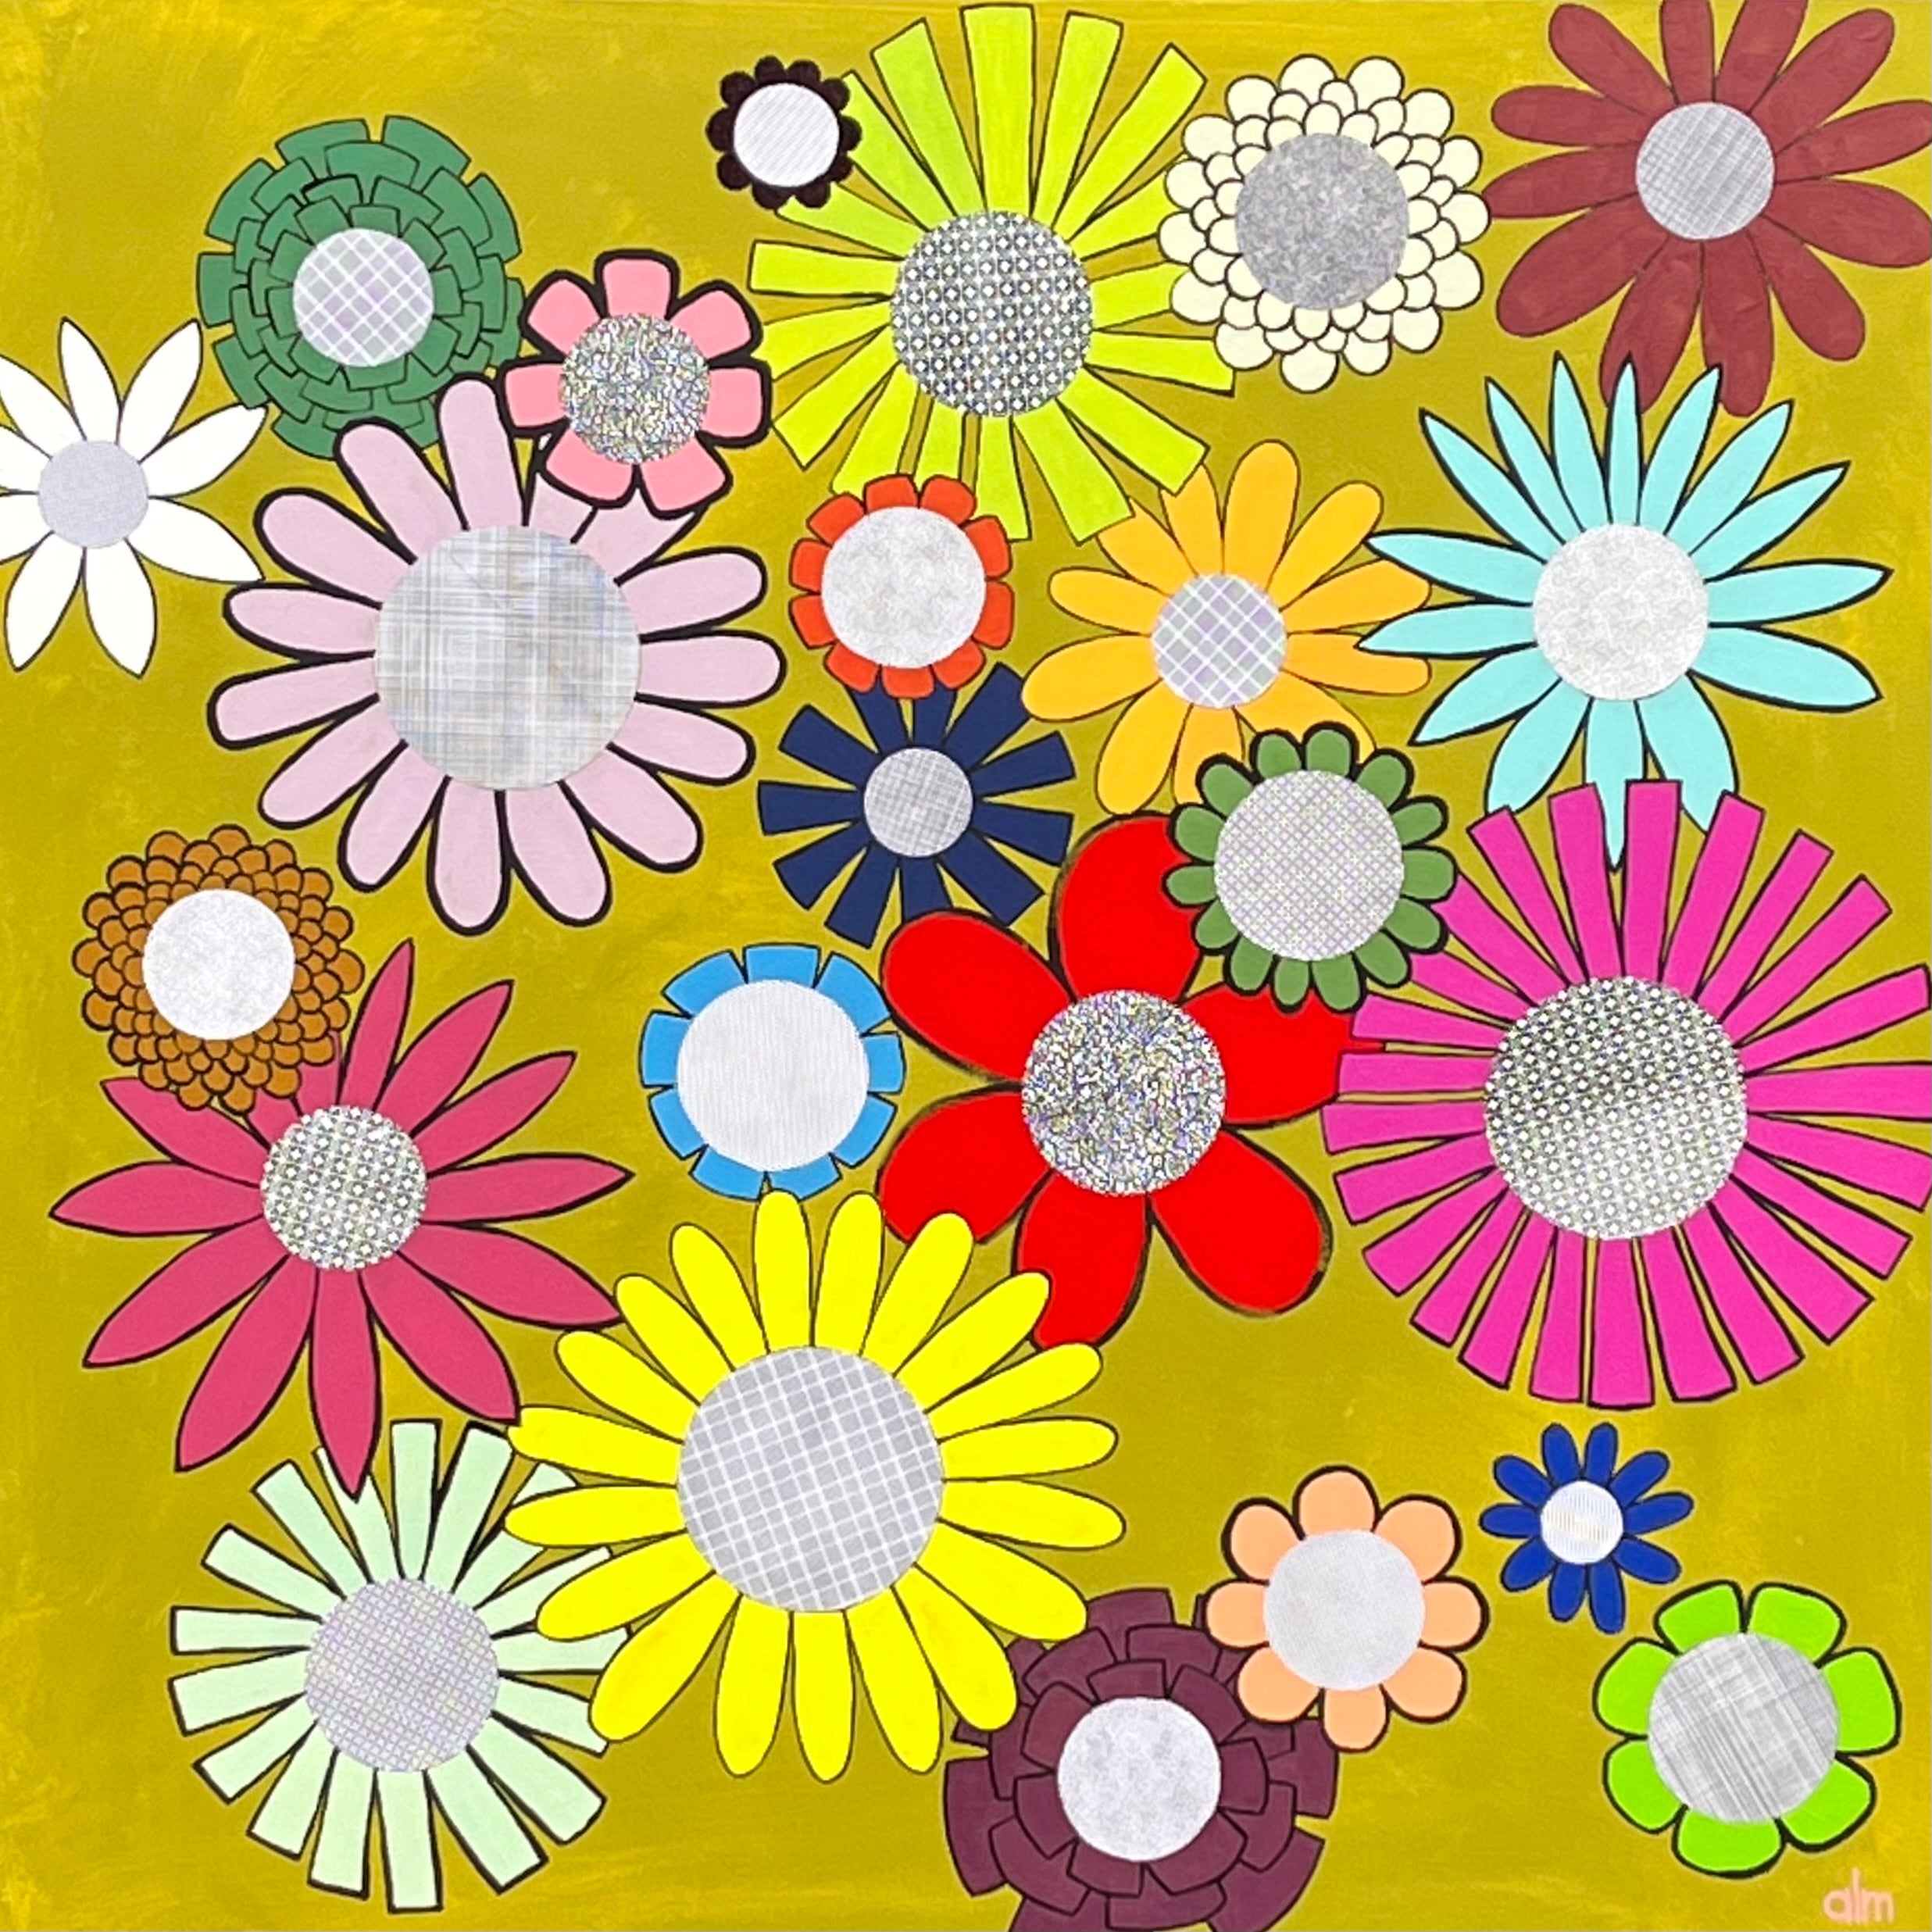 Flower Power acrylic painting on canvas. Brightly colored flowers of all colors outlined in black on a white background.